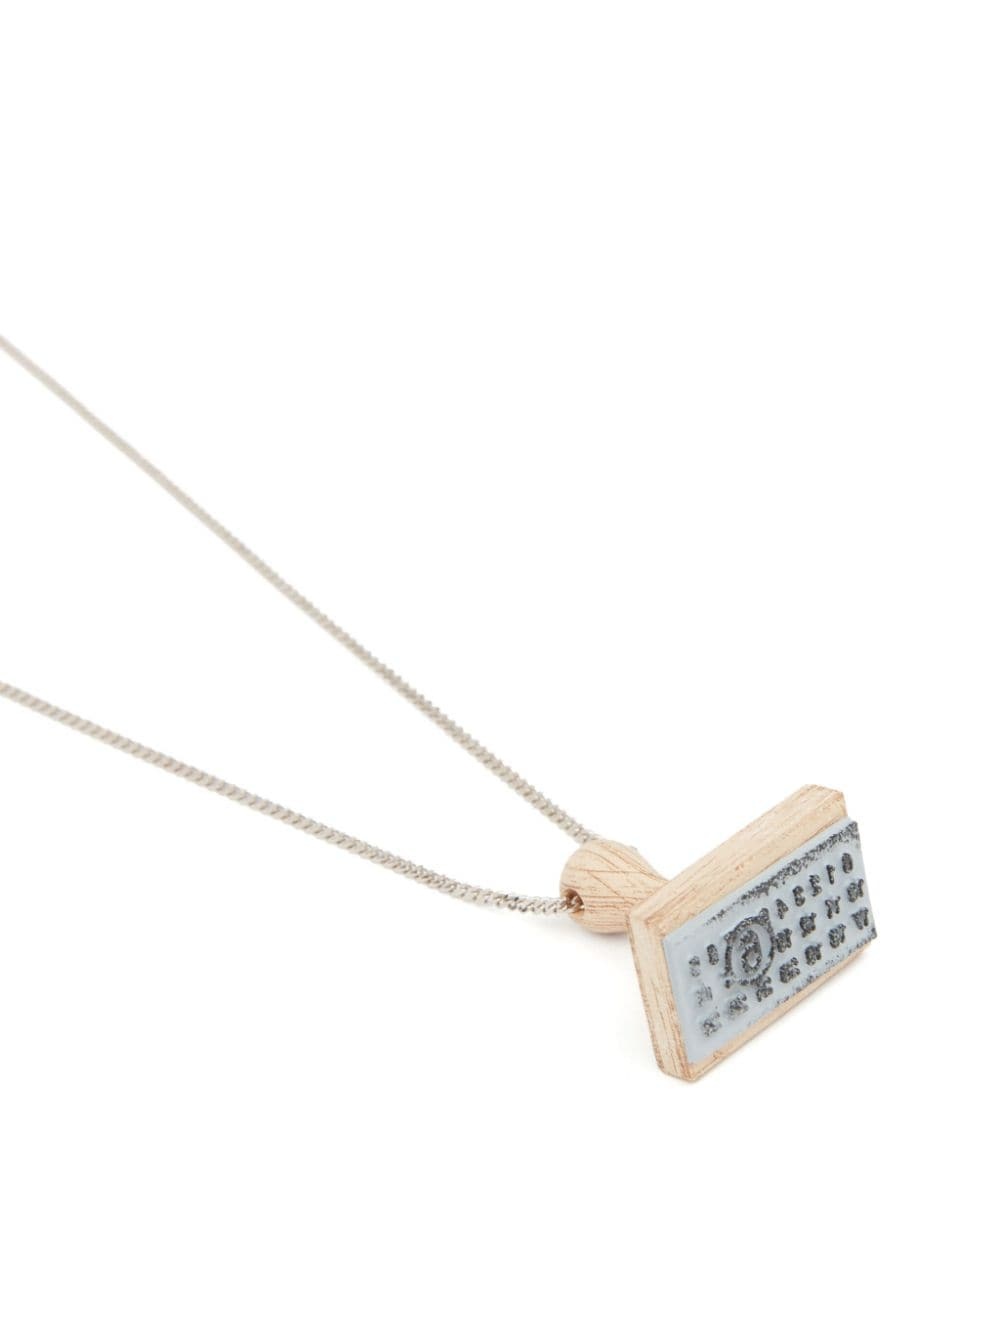 Stamp pendant necklace - 3